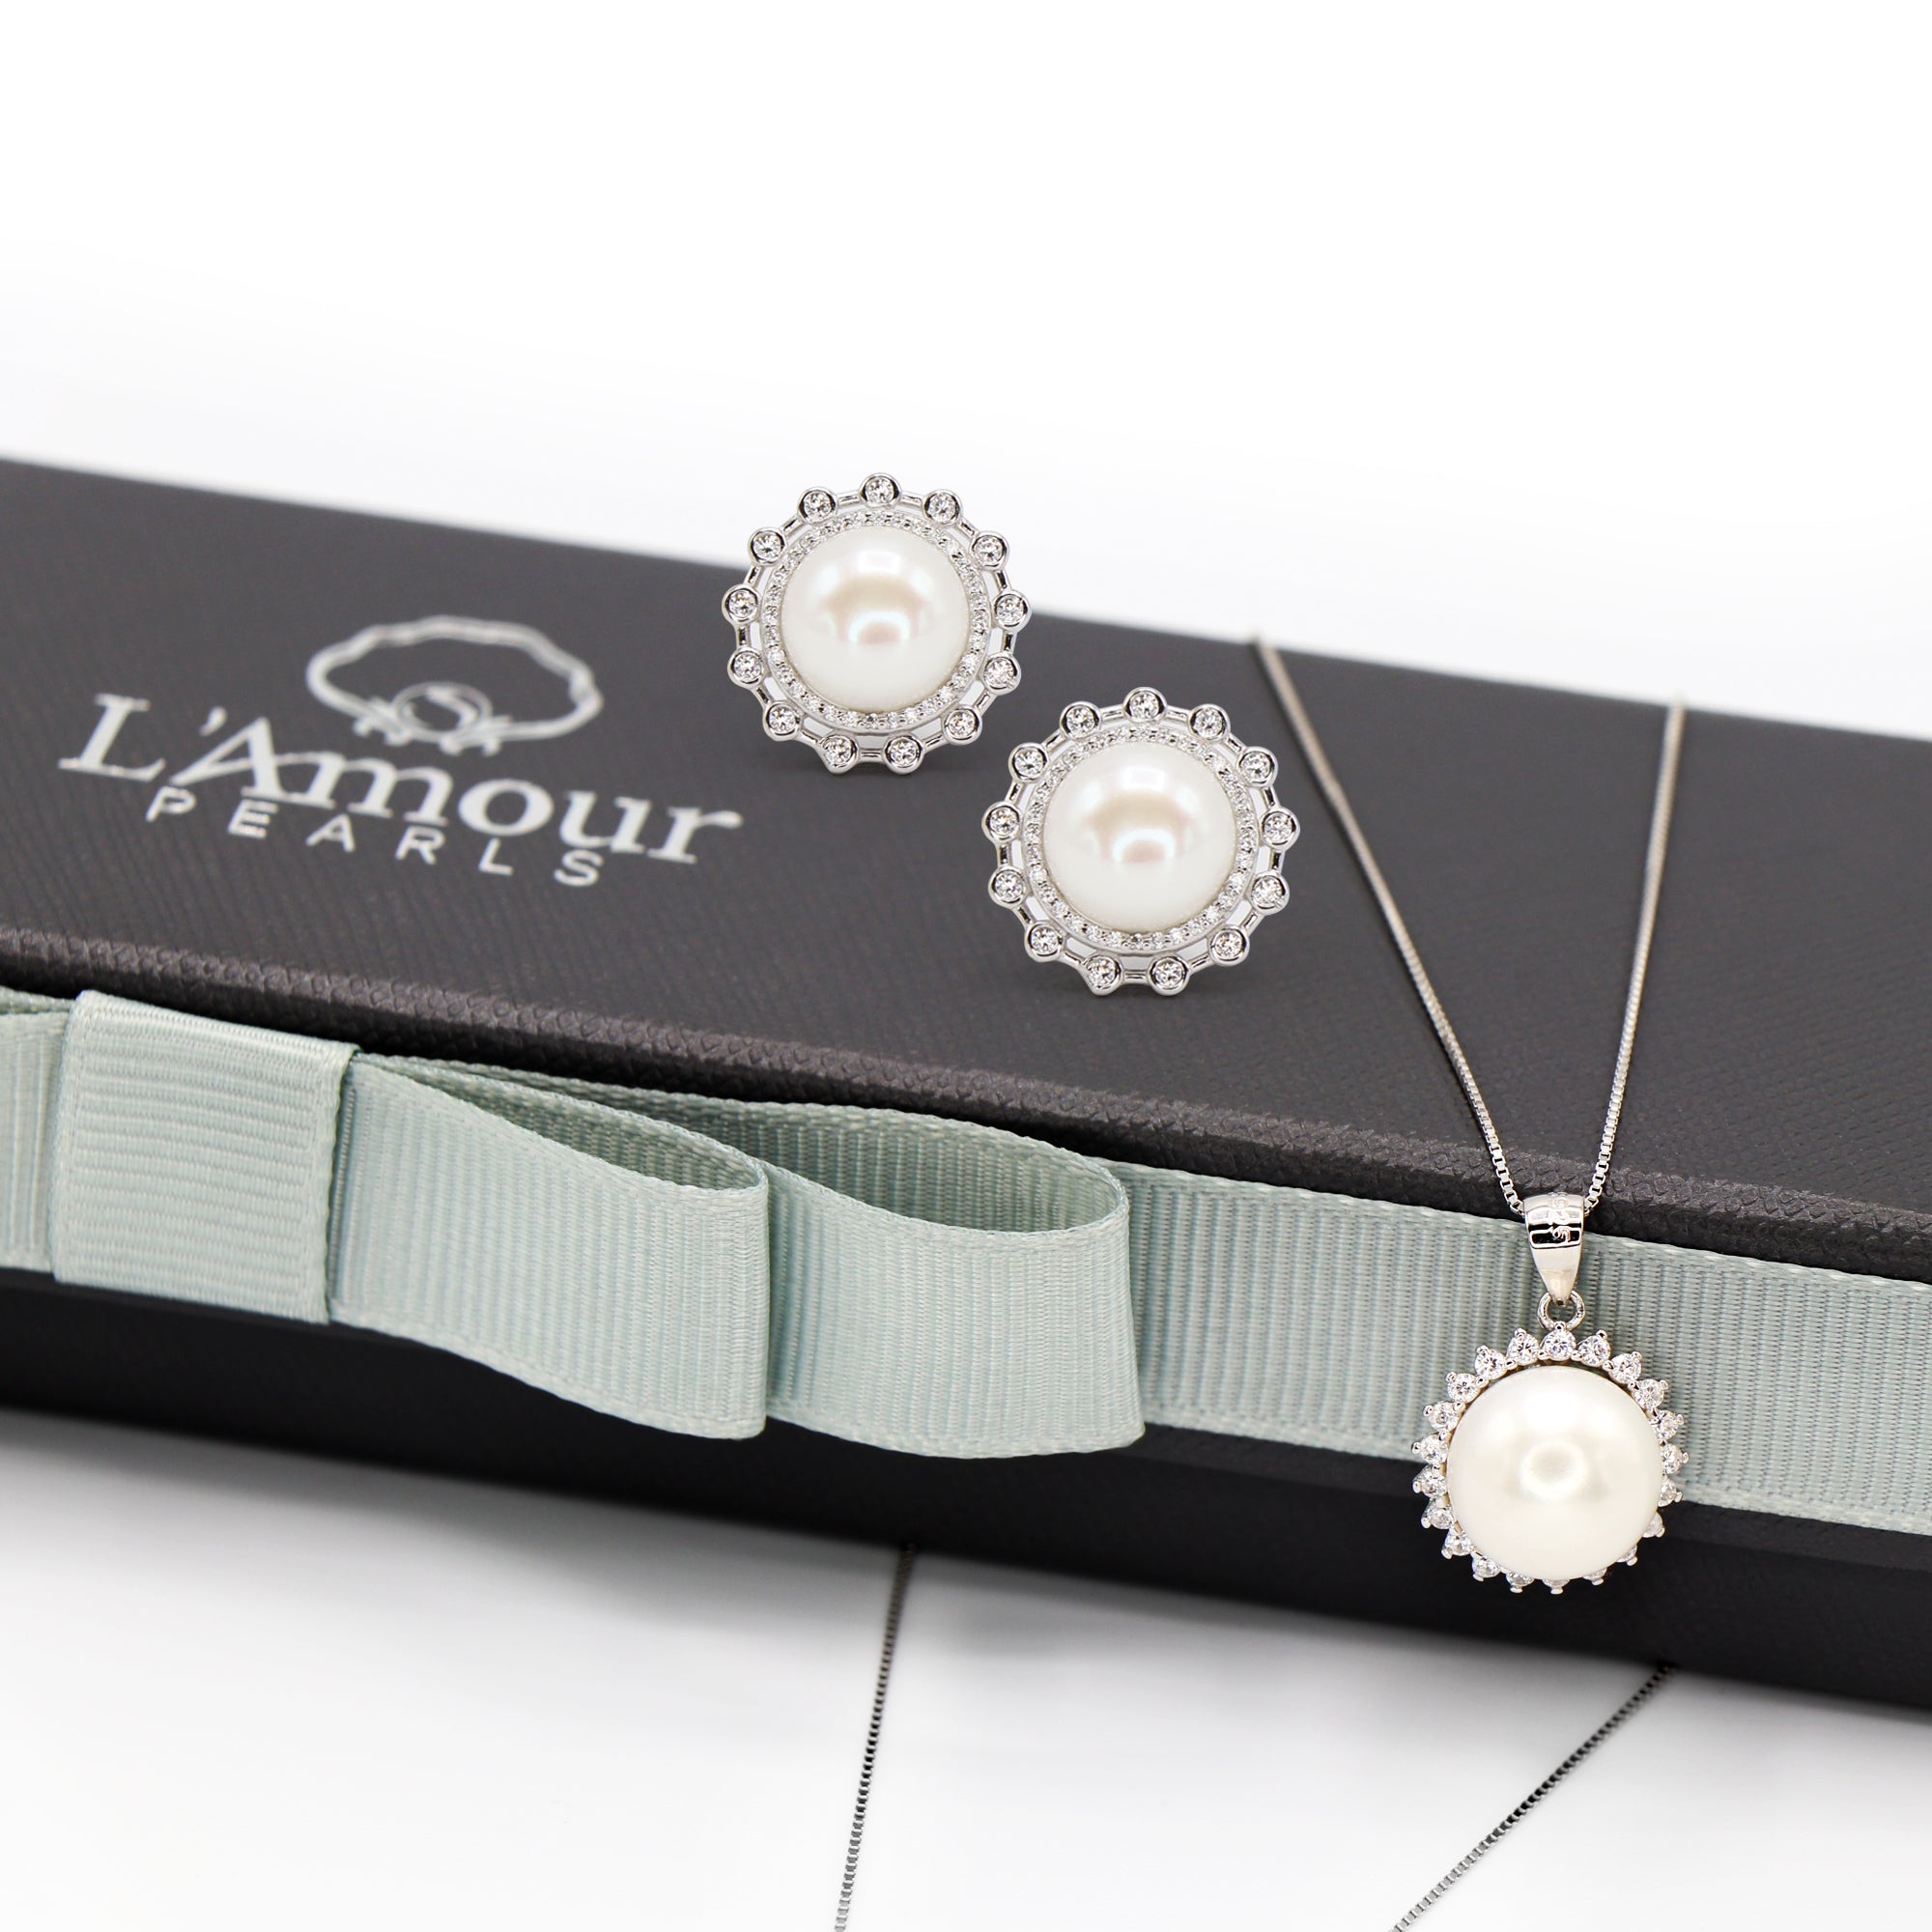 White Freshwater Pearl Halo Pendant with Sterling Silver Chain Necklace and Earring Set - L'Amour Pearls